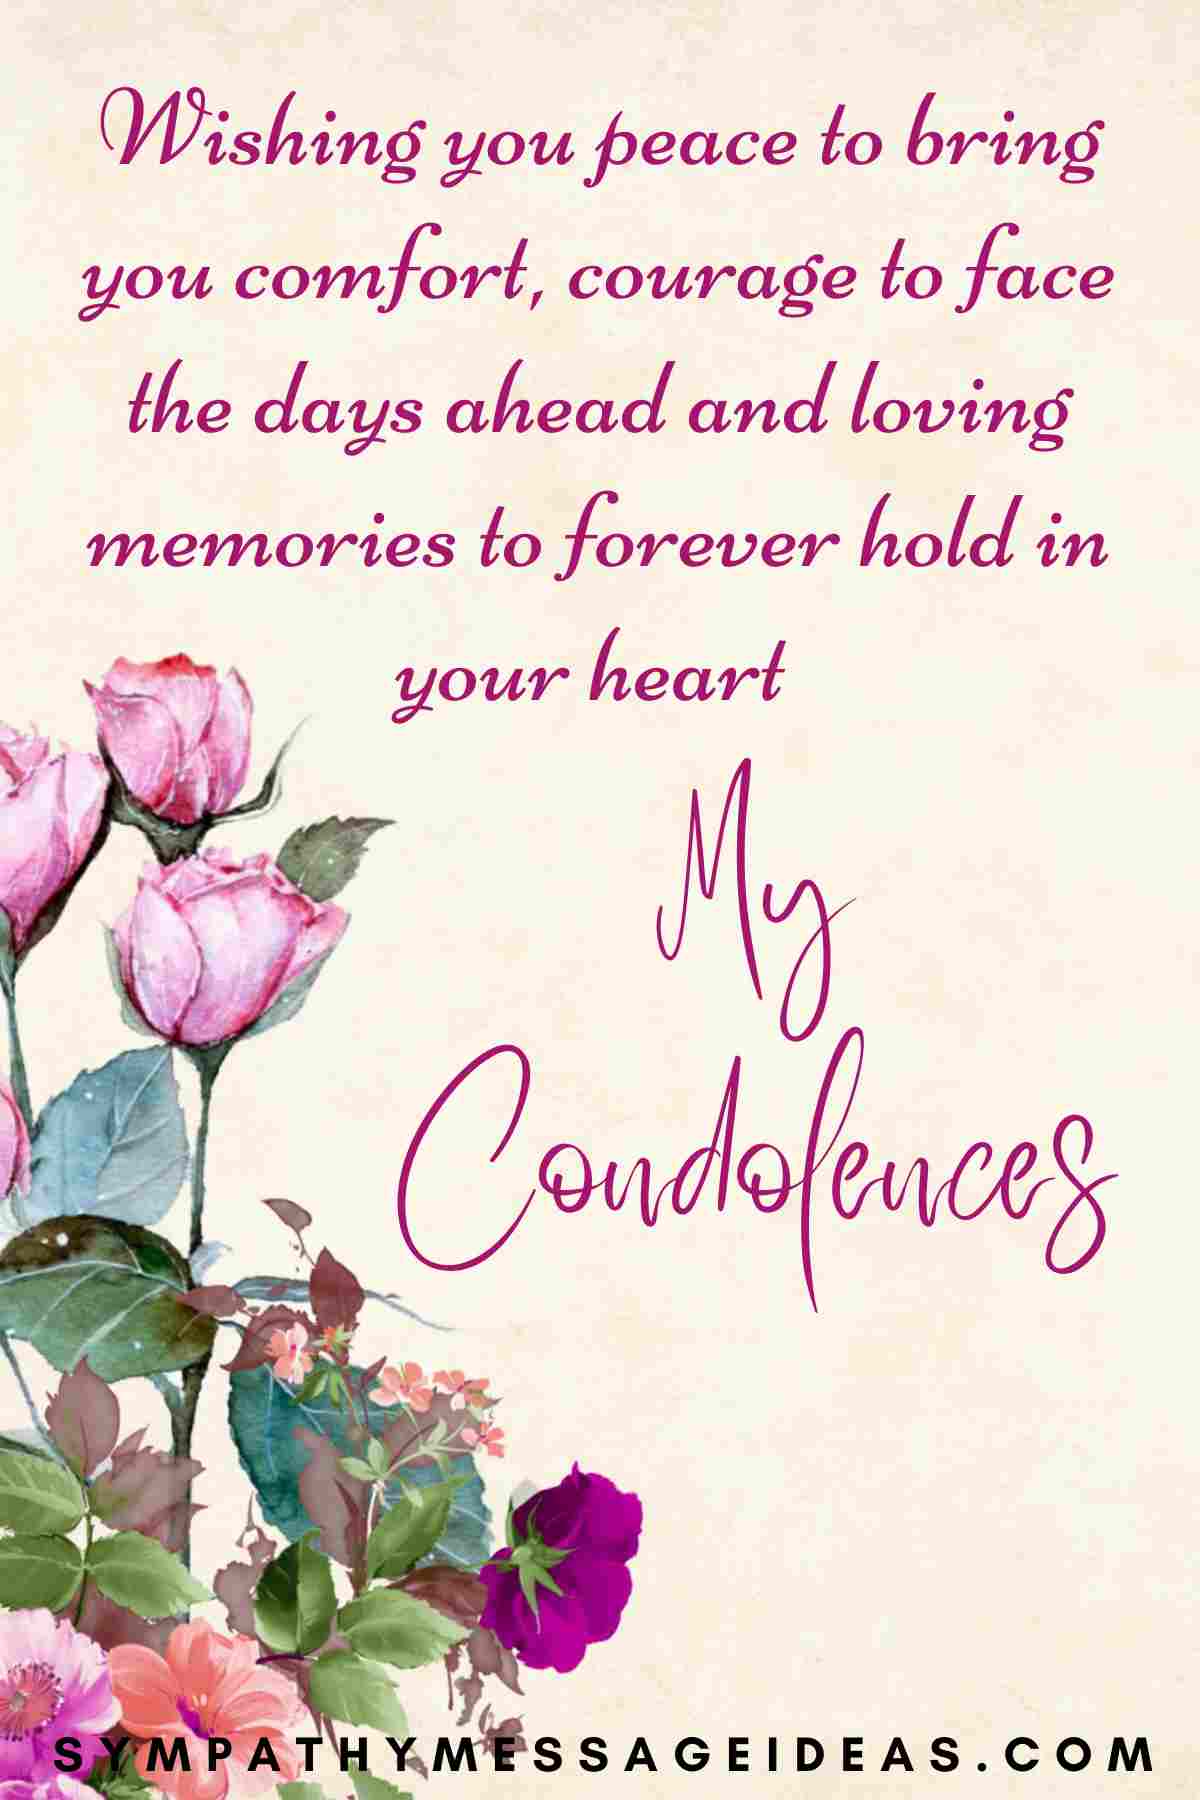 thoughtful and comforting condolence message